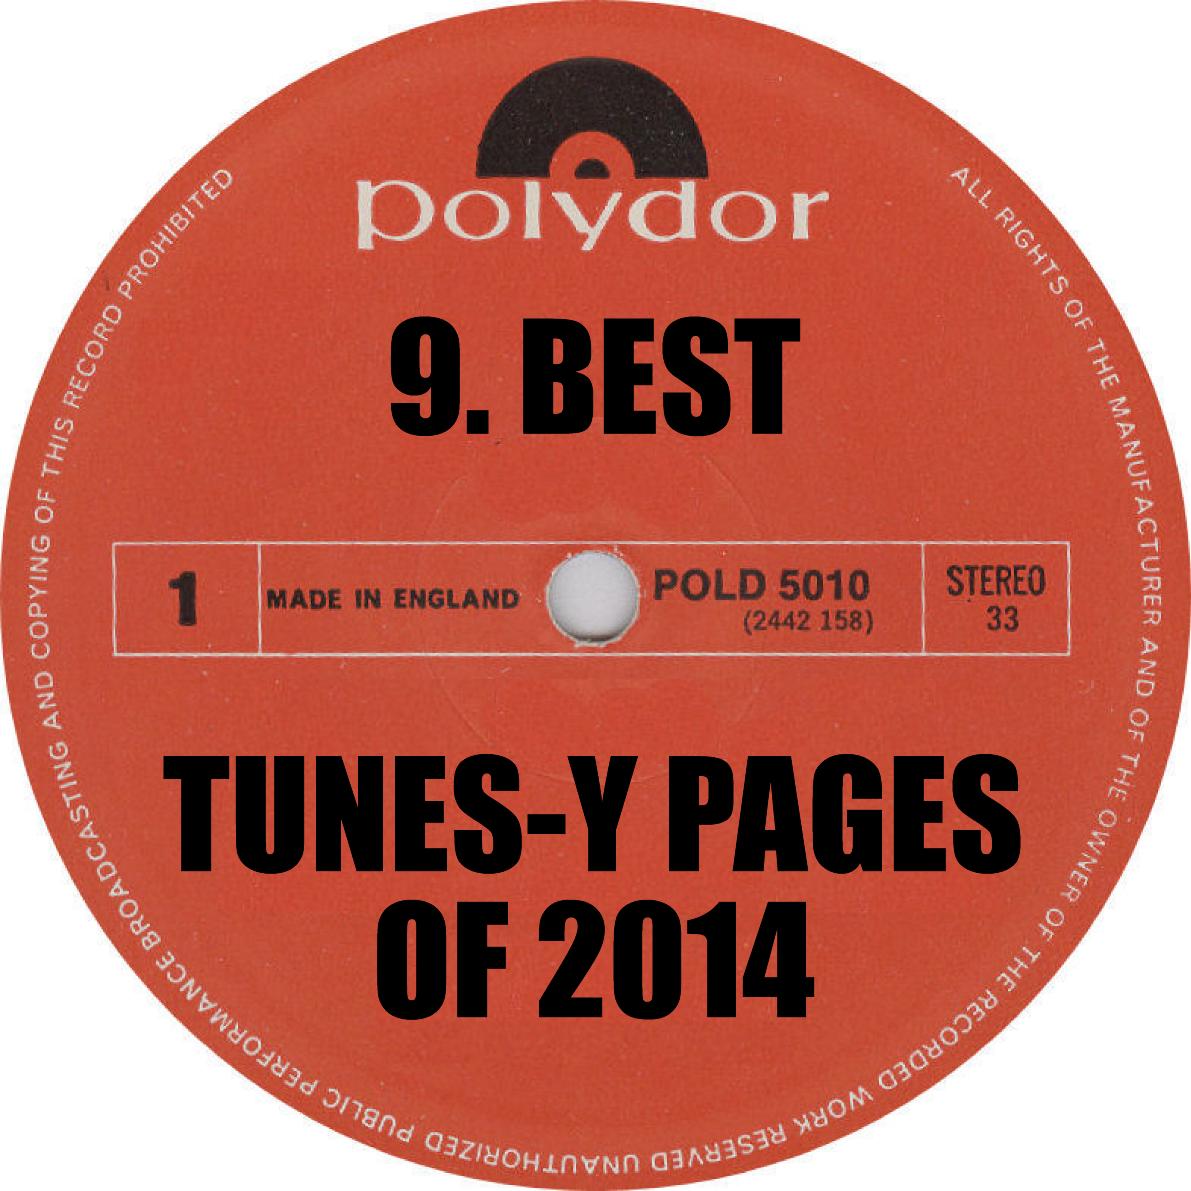 VA Best Tunesy Pages of 2014 Polydor Records Label